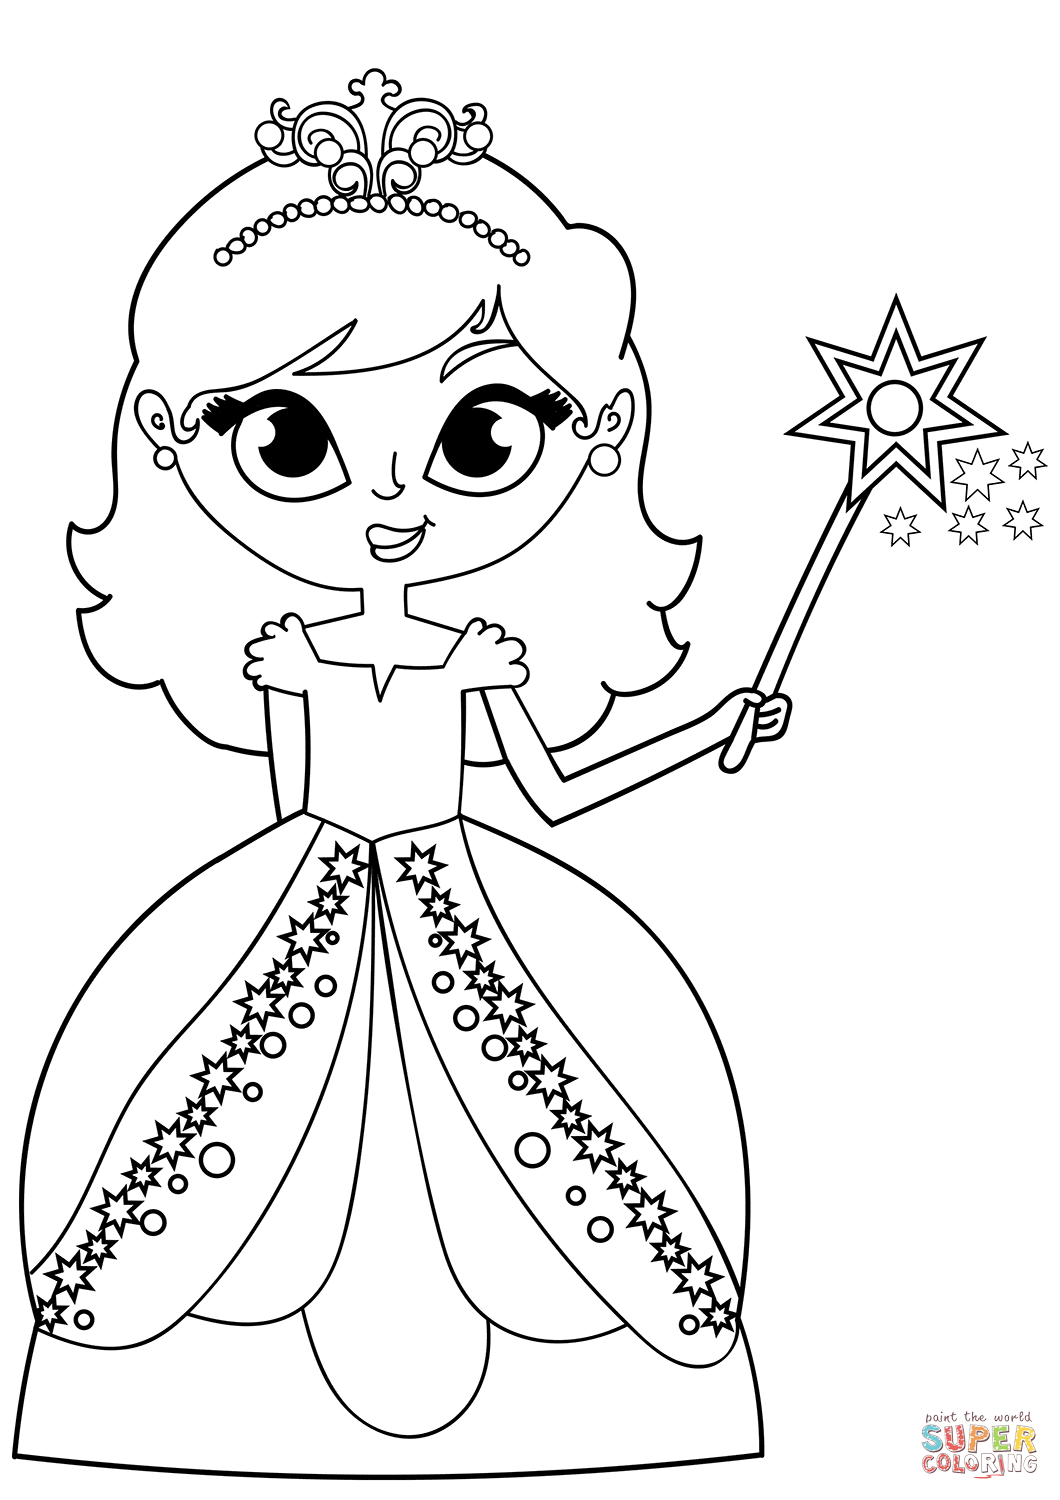 Princess with Magic Stick coloring page | Free Printable Coloring Pages